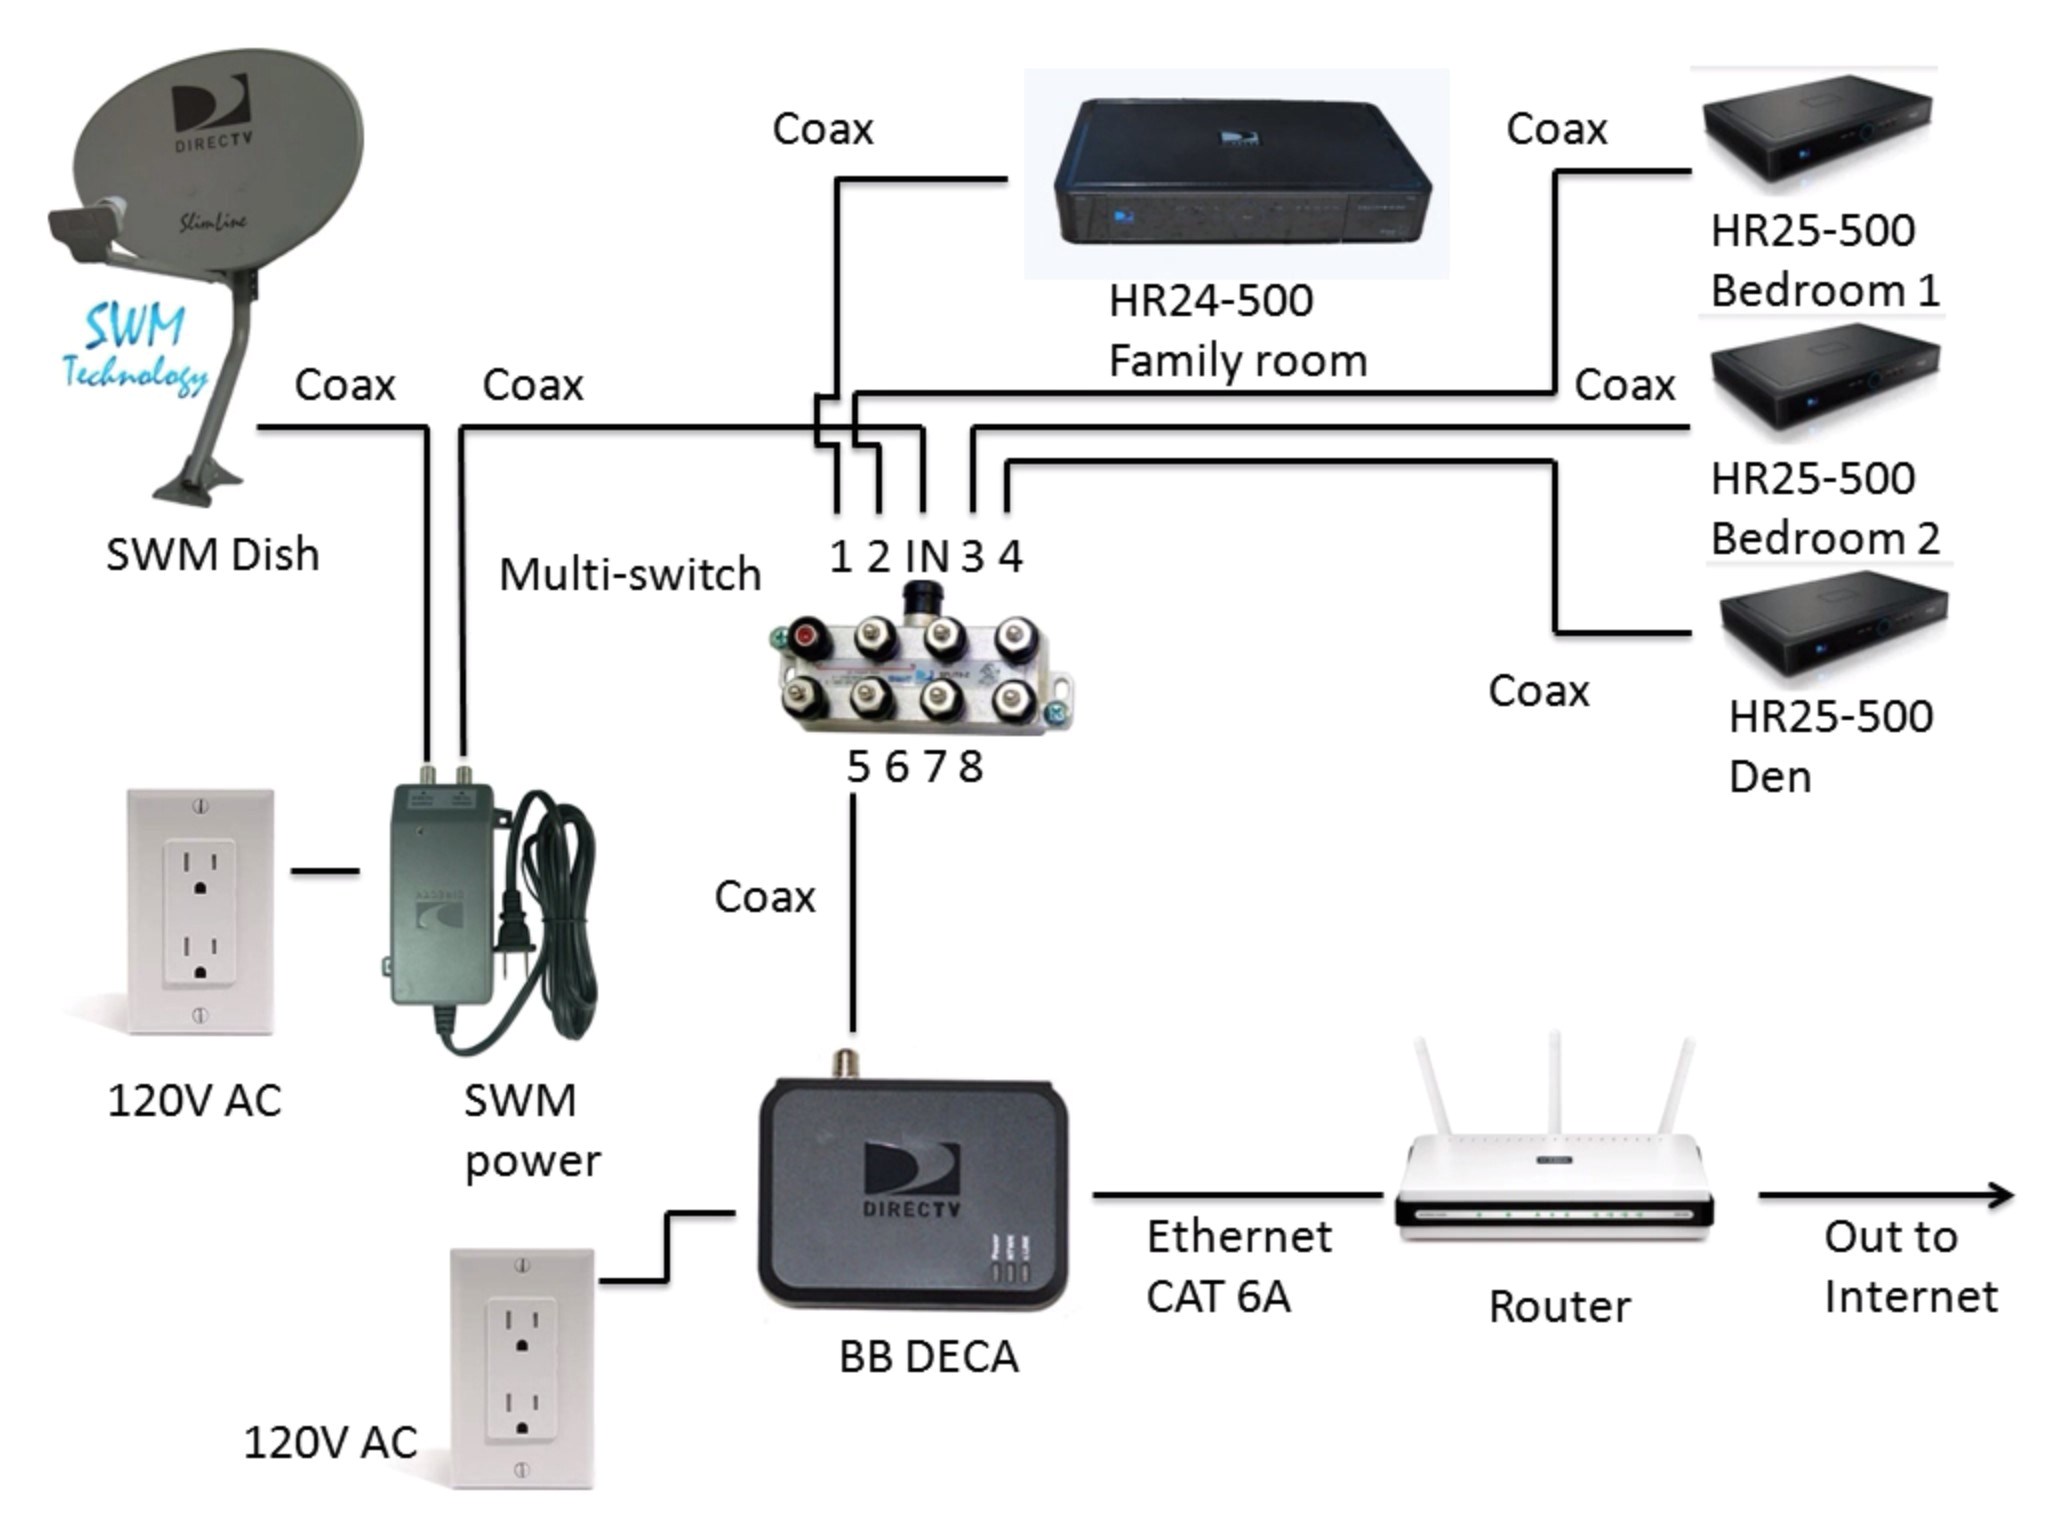 wiring diagram for direct tv wiring diagram files direct tv to hdmi wiring diagram